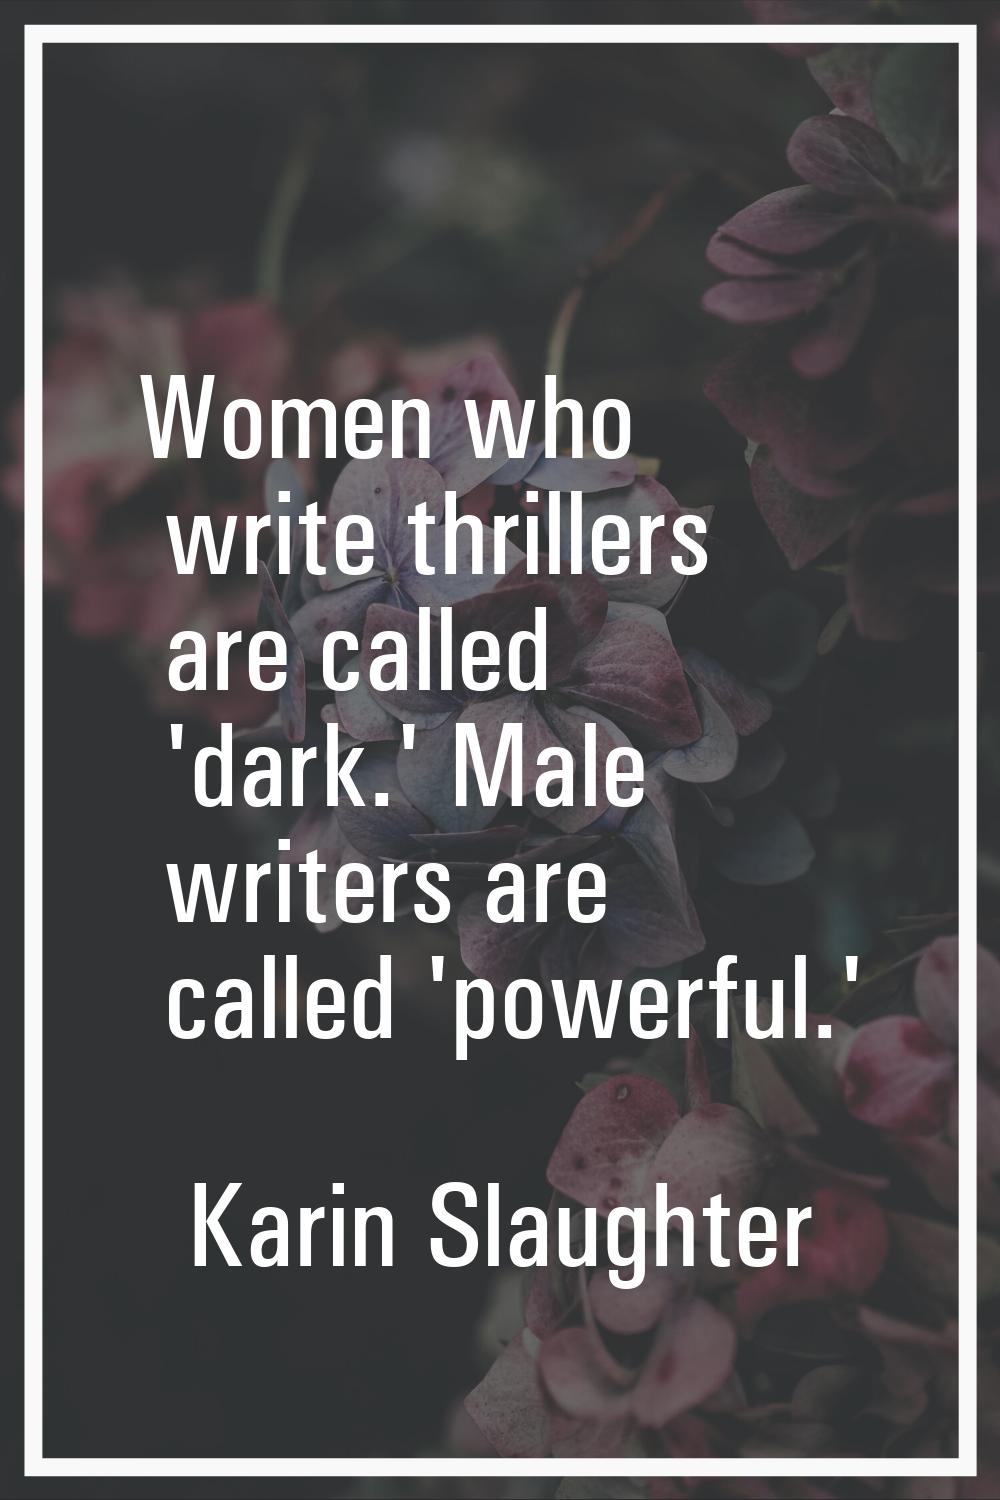 Women who write thrillers are called 'dark.' Male writers are called 'powerful.'